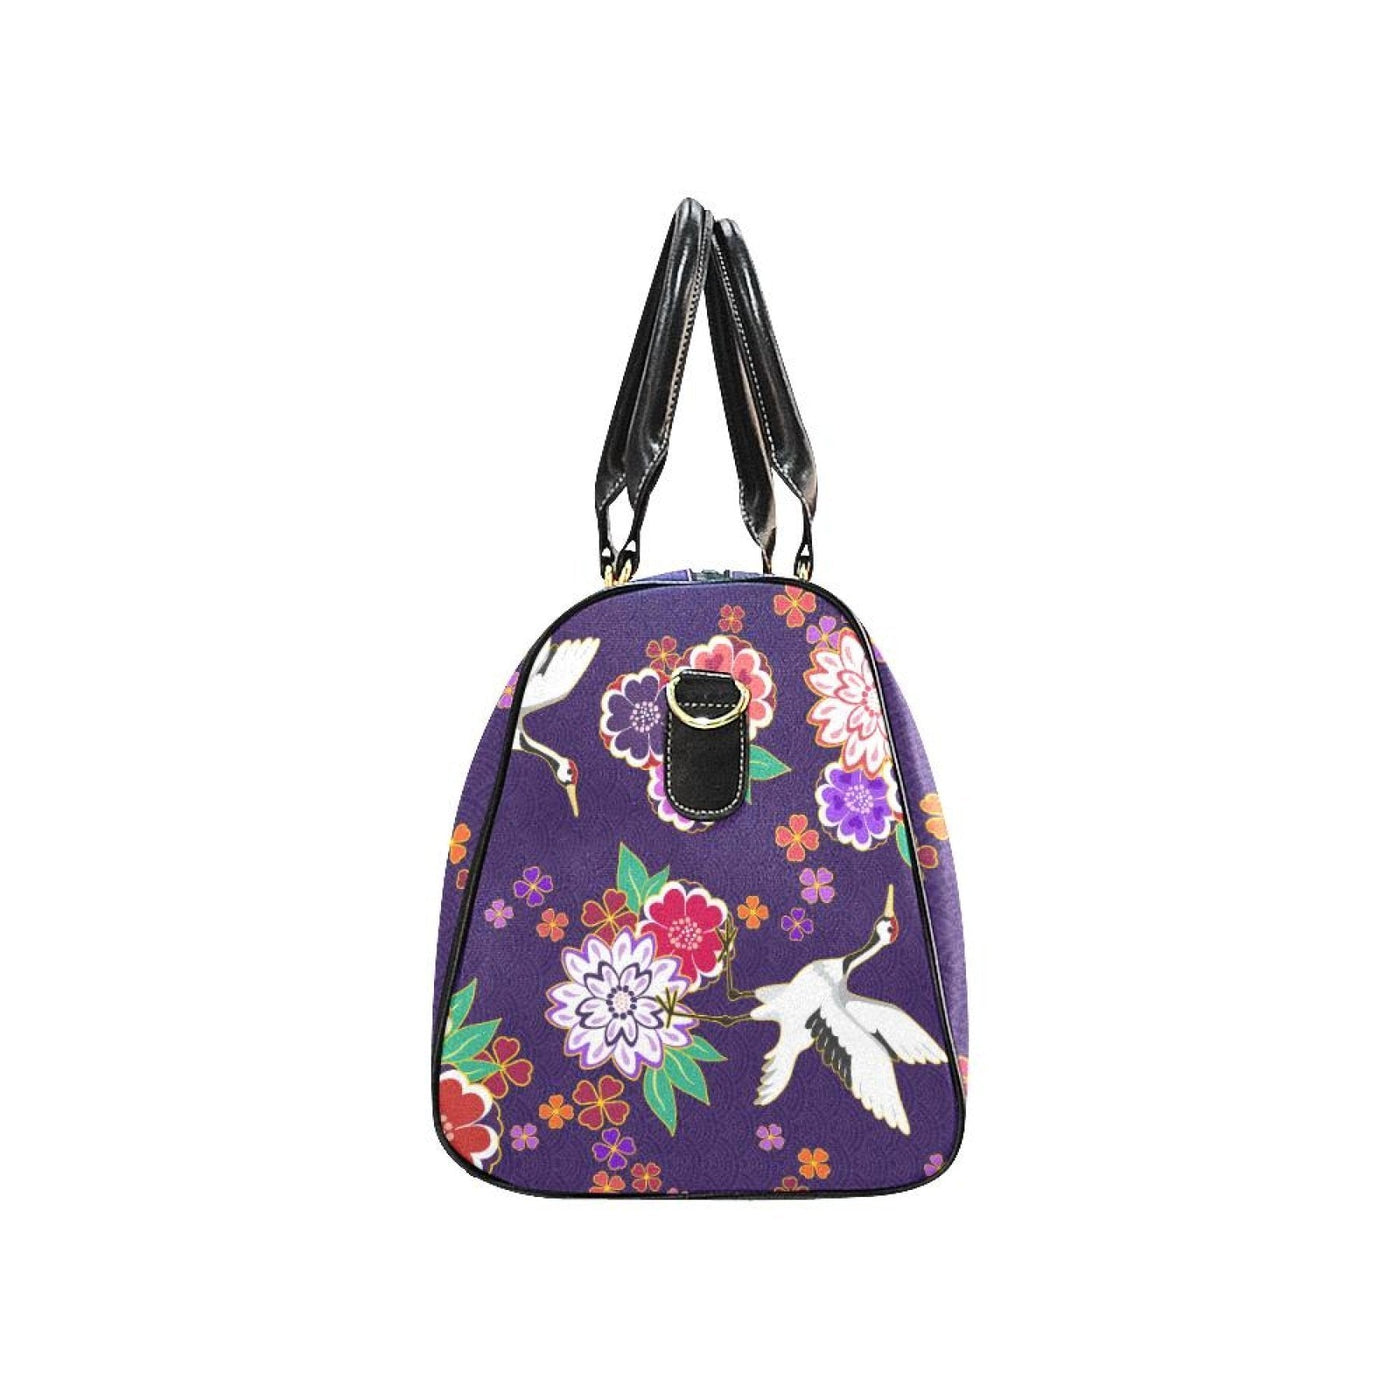 Travel Bag Purple Floral Double Handle Carry-bag - Bags | Travel Bags | Leather